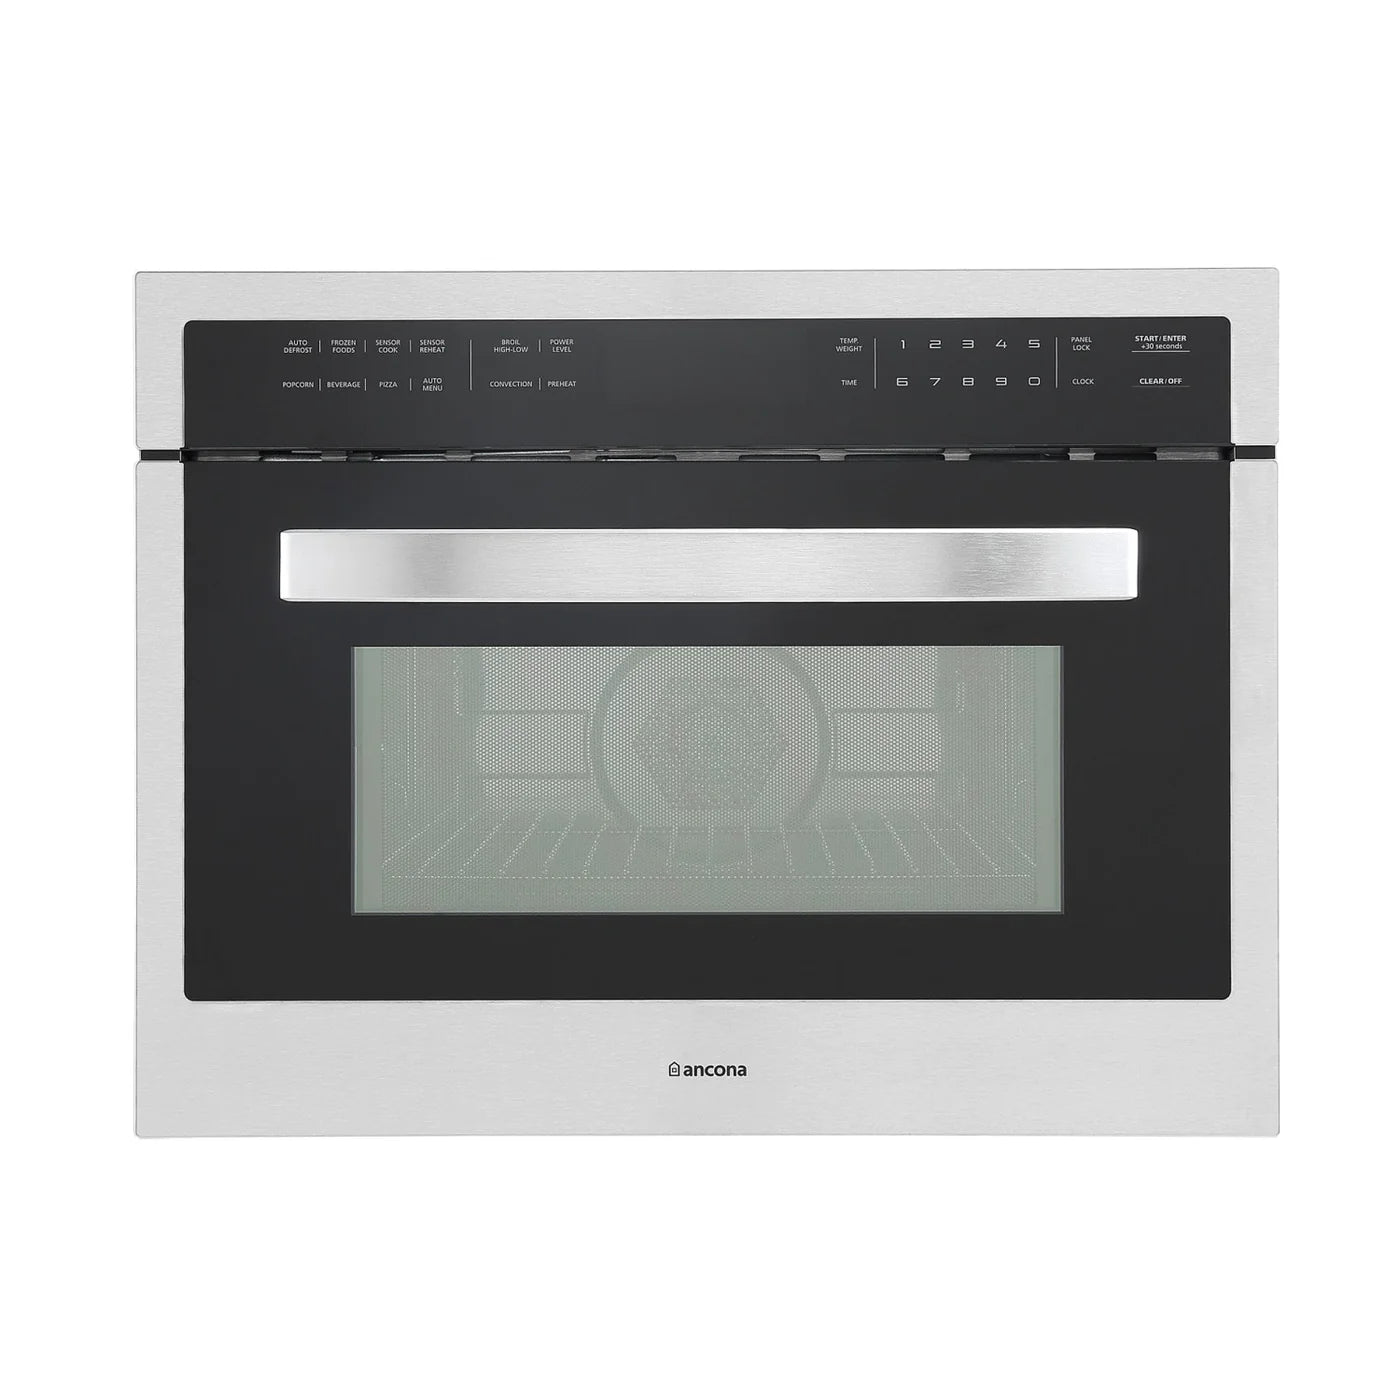 AN-2710SS - WALL OVENS - Ancona - Combination Oven - Stainless Steel - Open Box - WALL OVENS - BonPrix Électroménagers